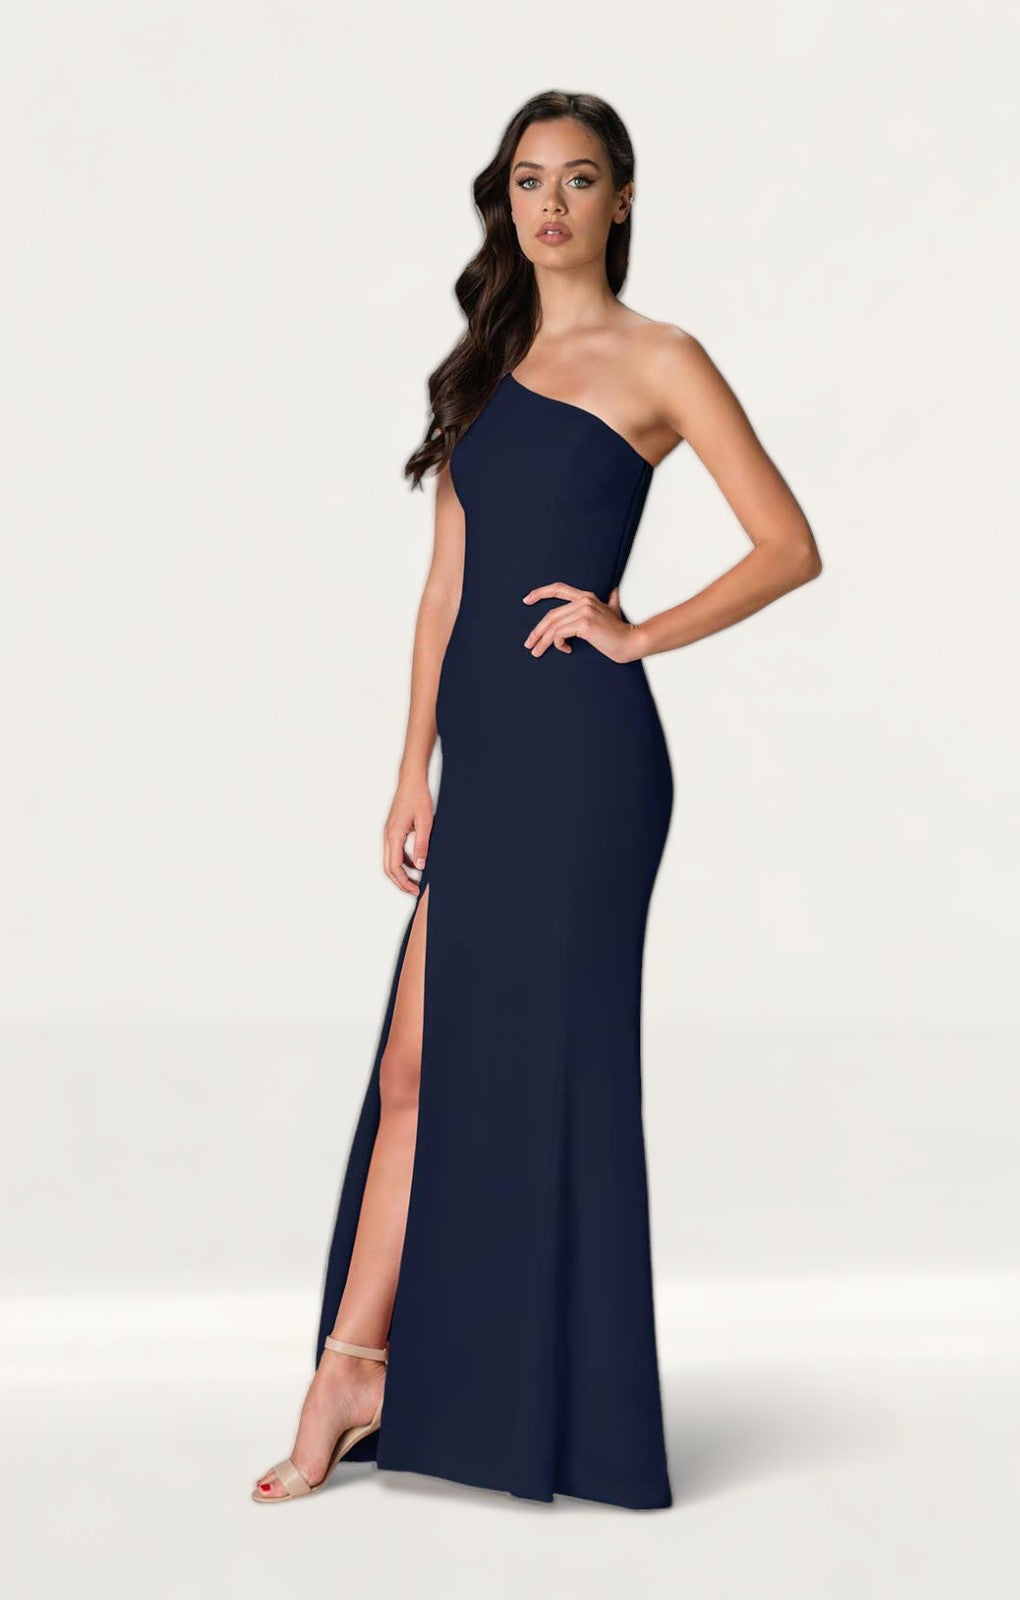 Dress The Population Amy Navy Maxi Dress product image